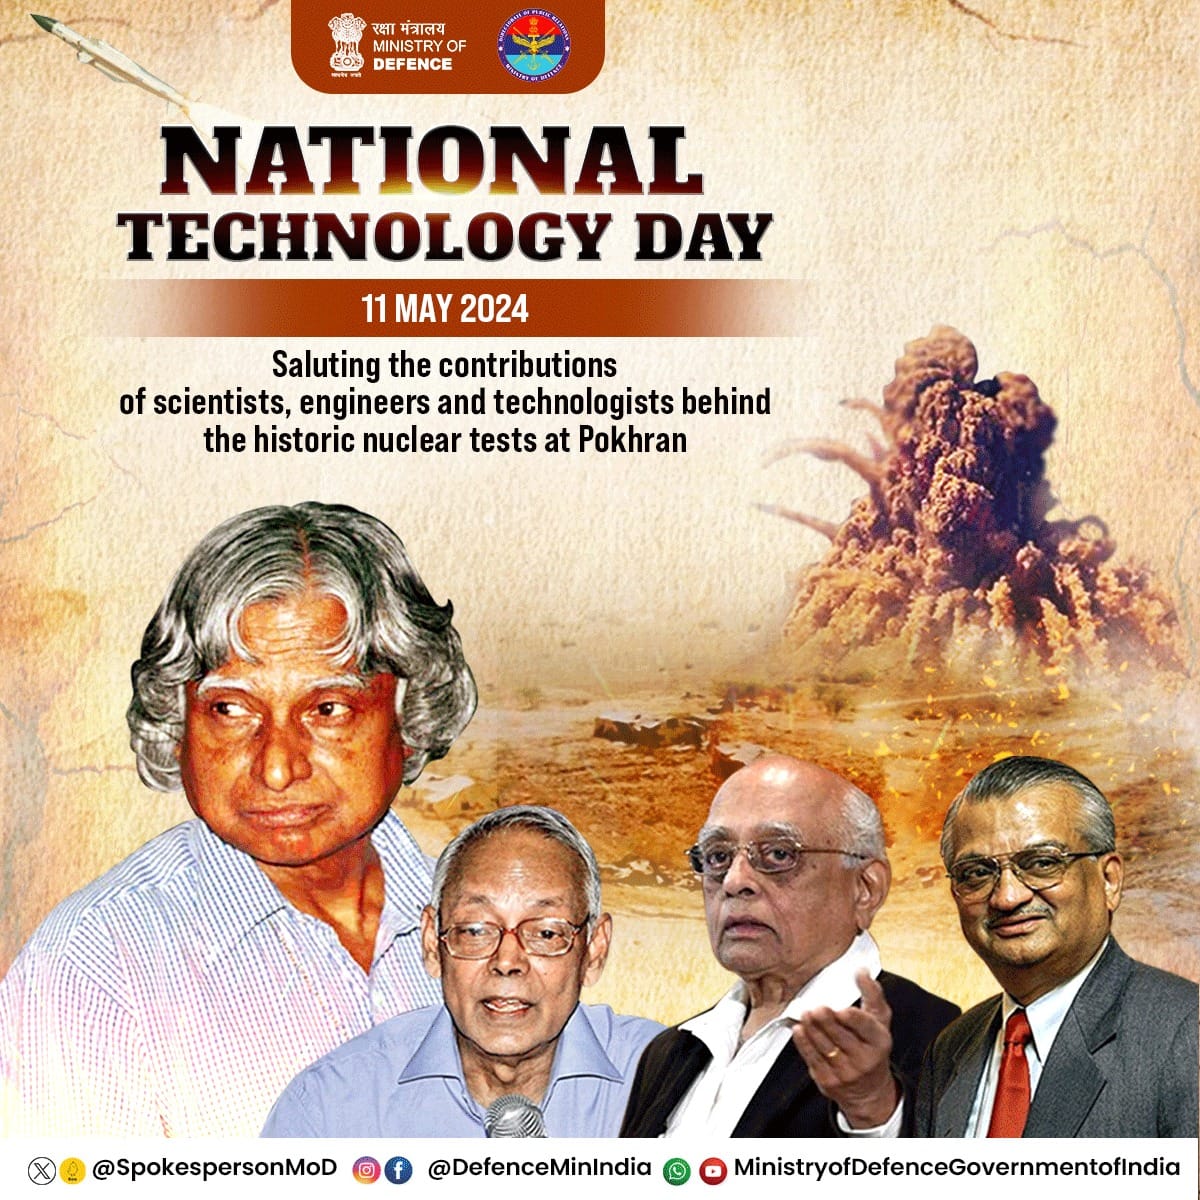 11 May 1998 Pokhran. Salute to our great technology leaders. Wishing more breakthroughs & achievements on National Technology Day.